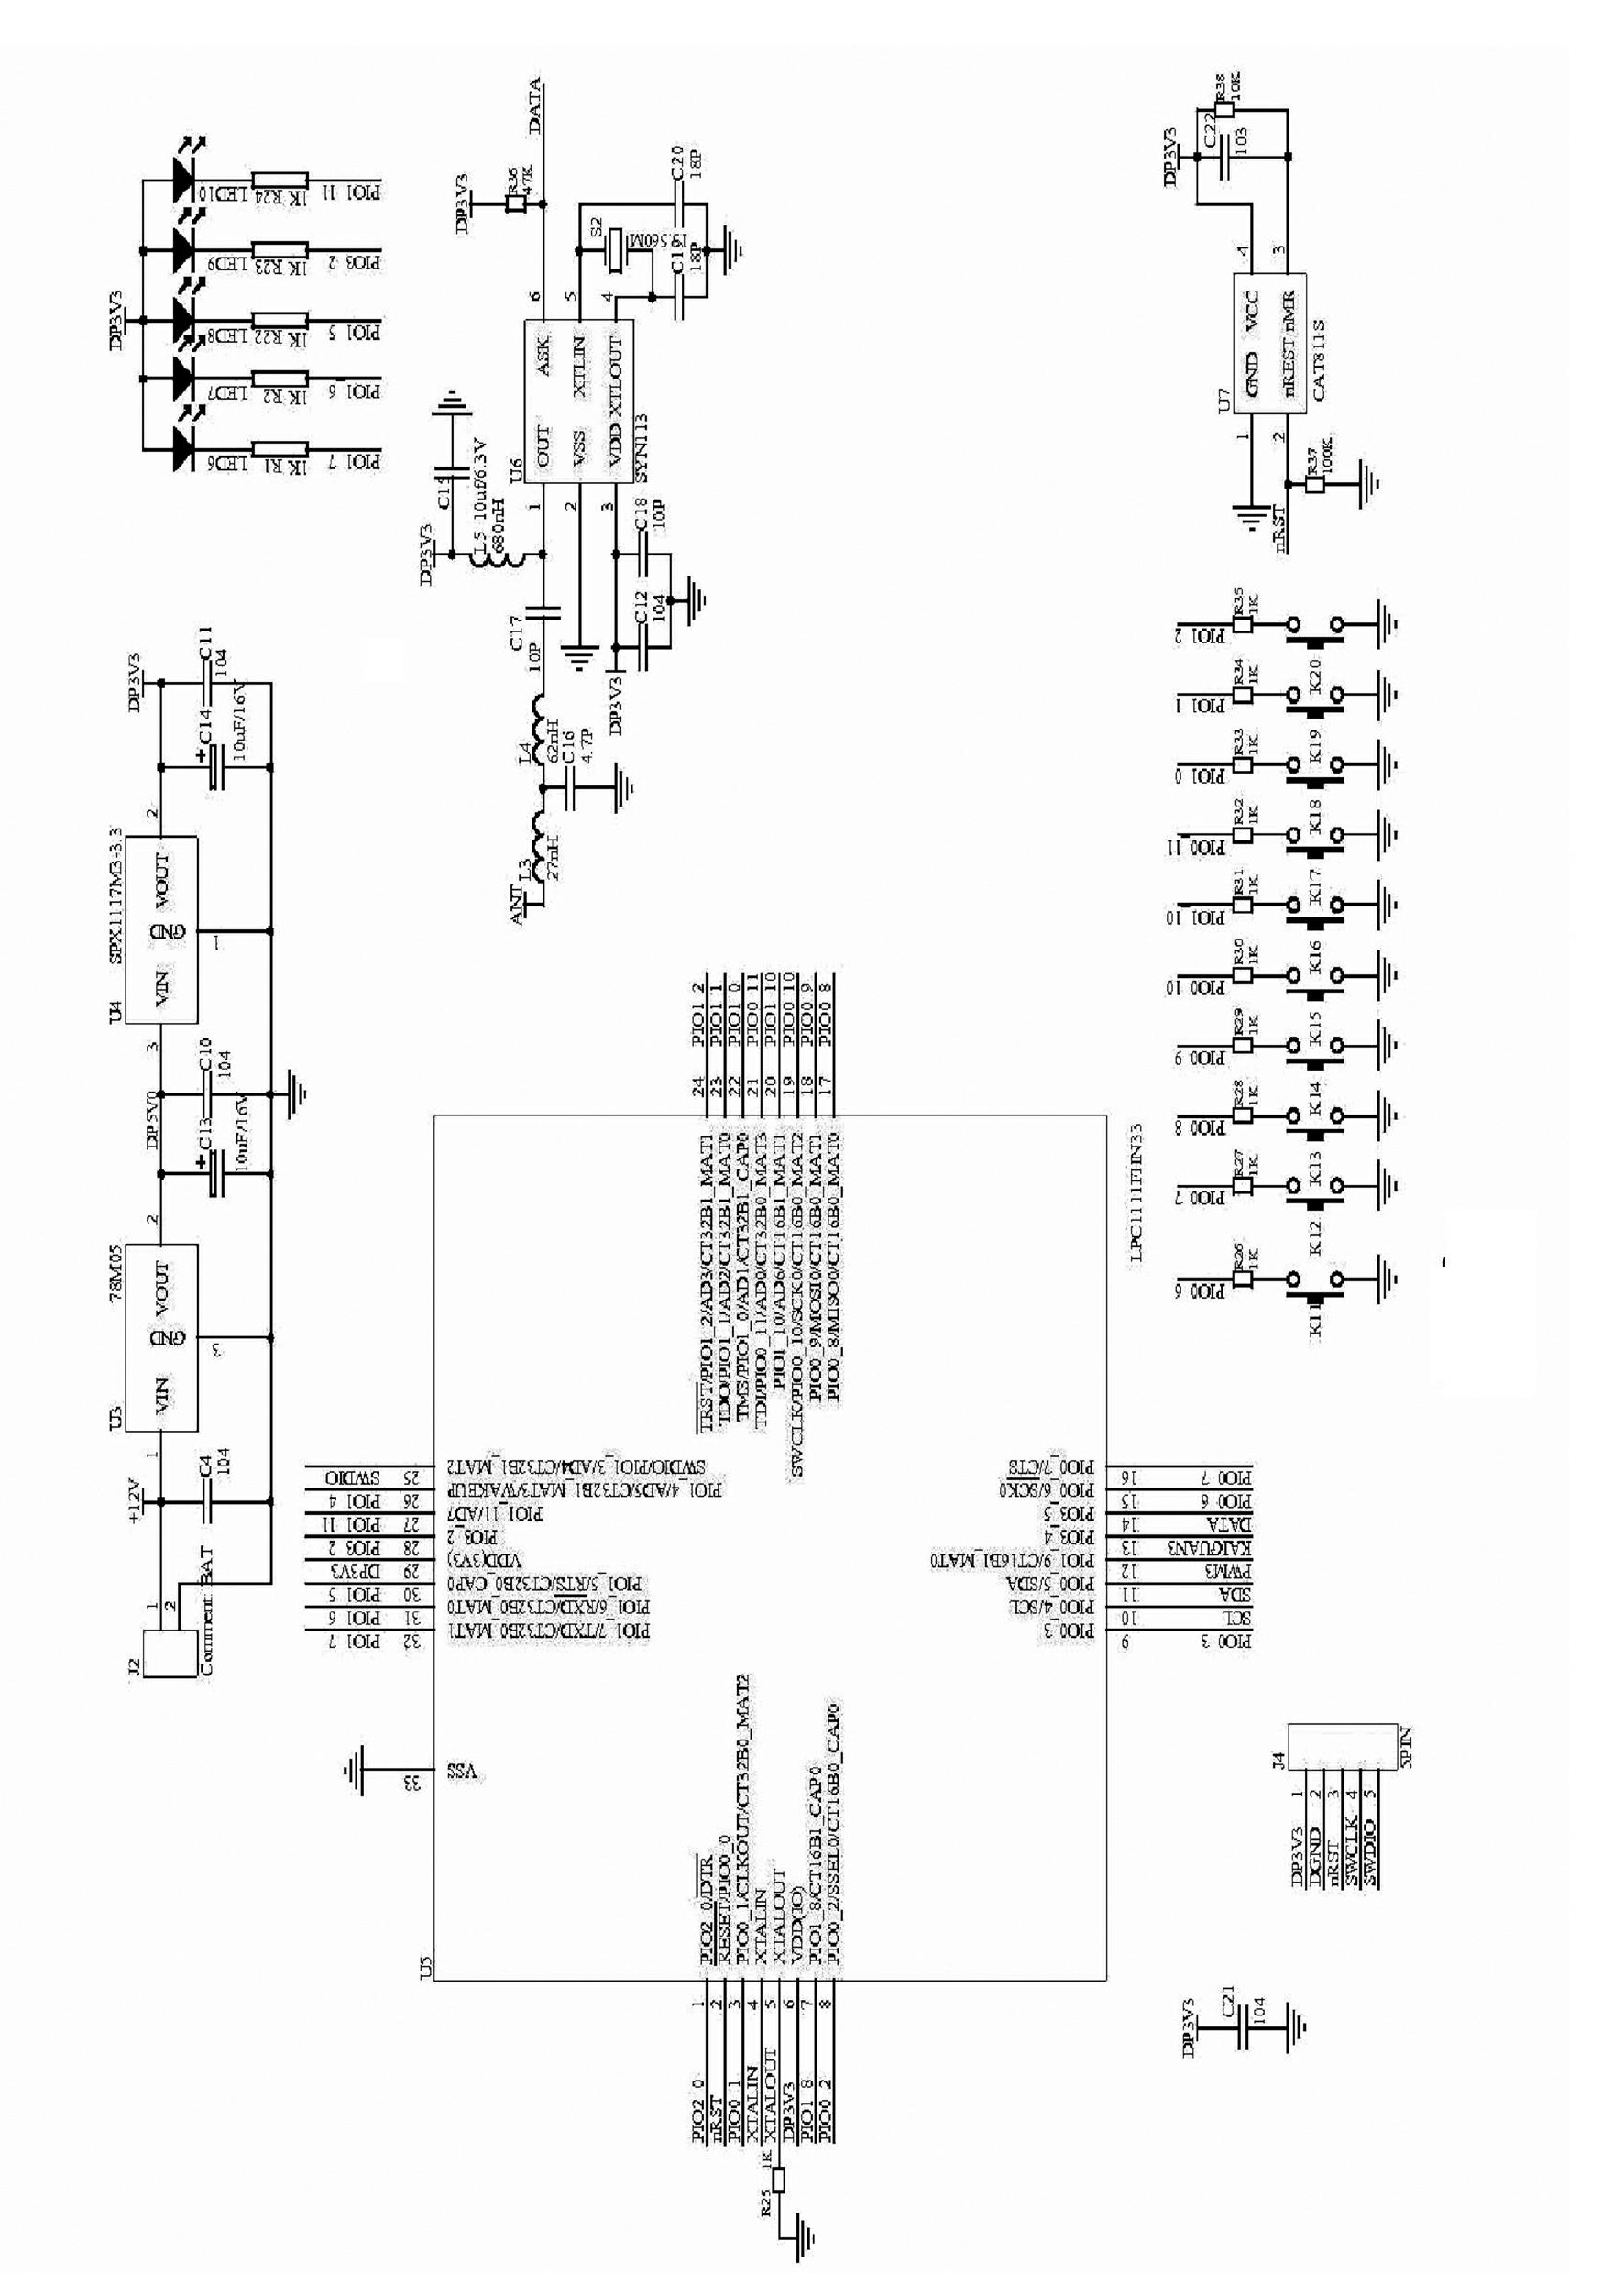 Lighting lamp control device and lighting system